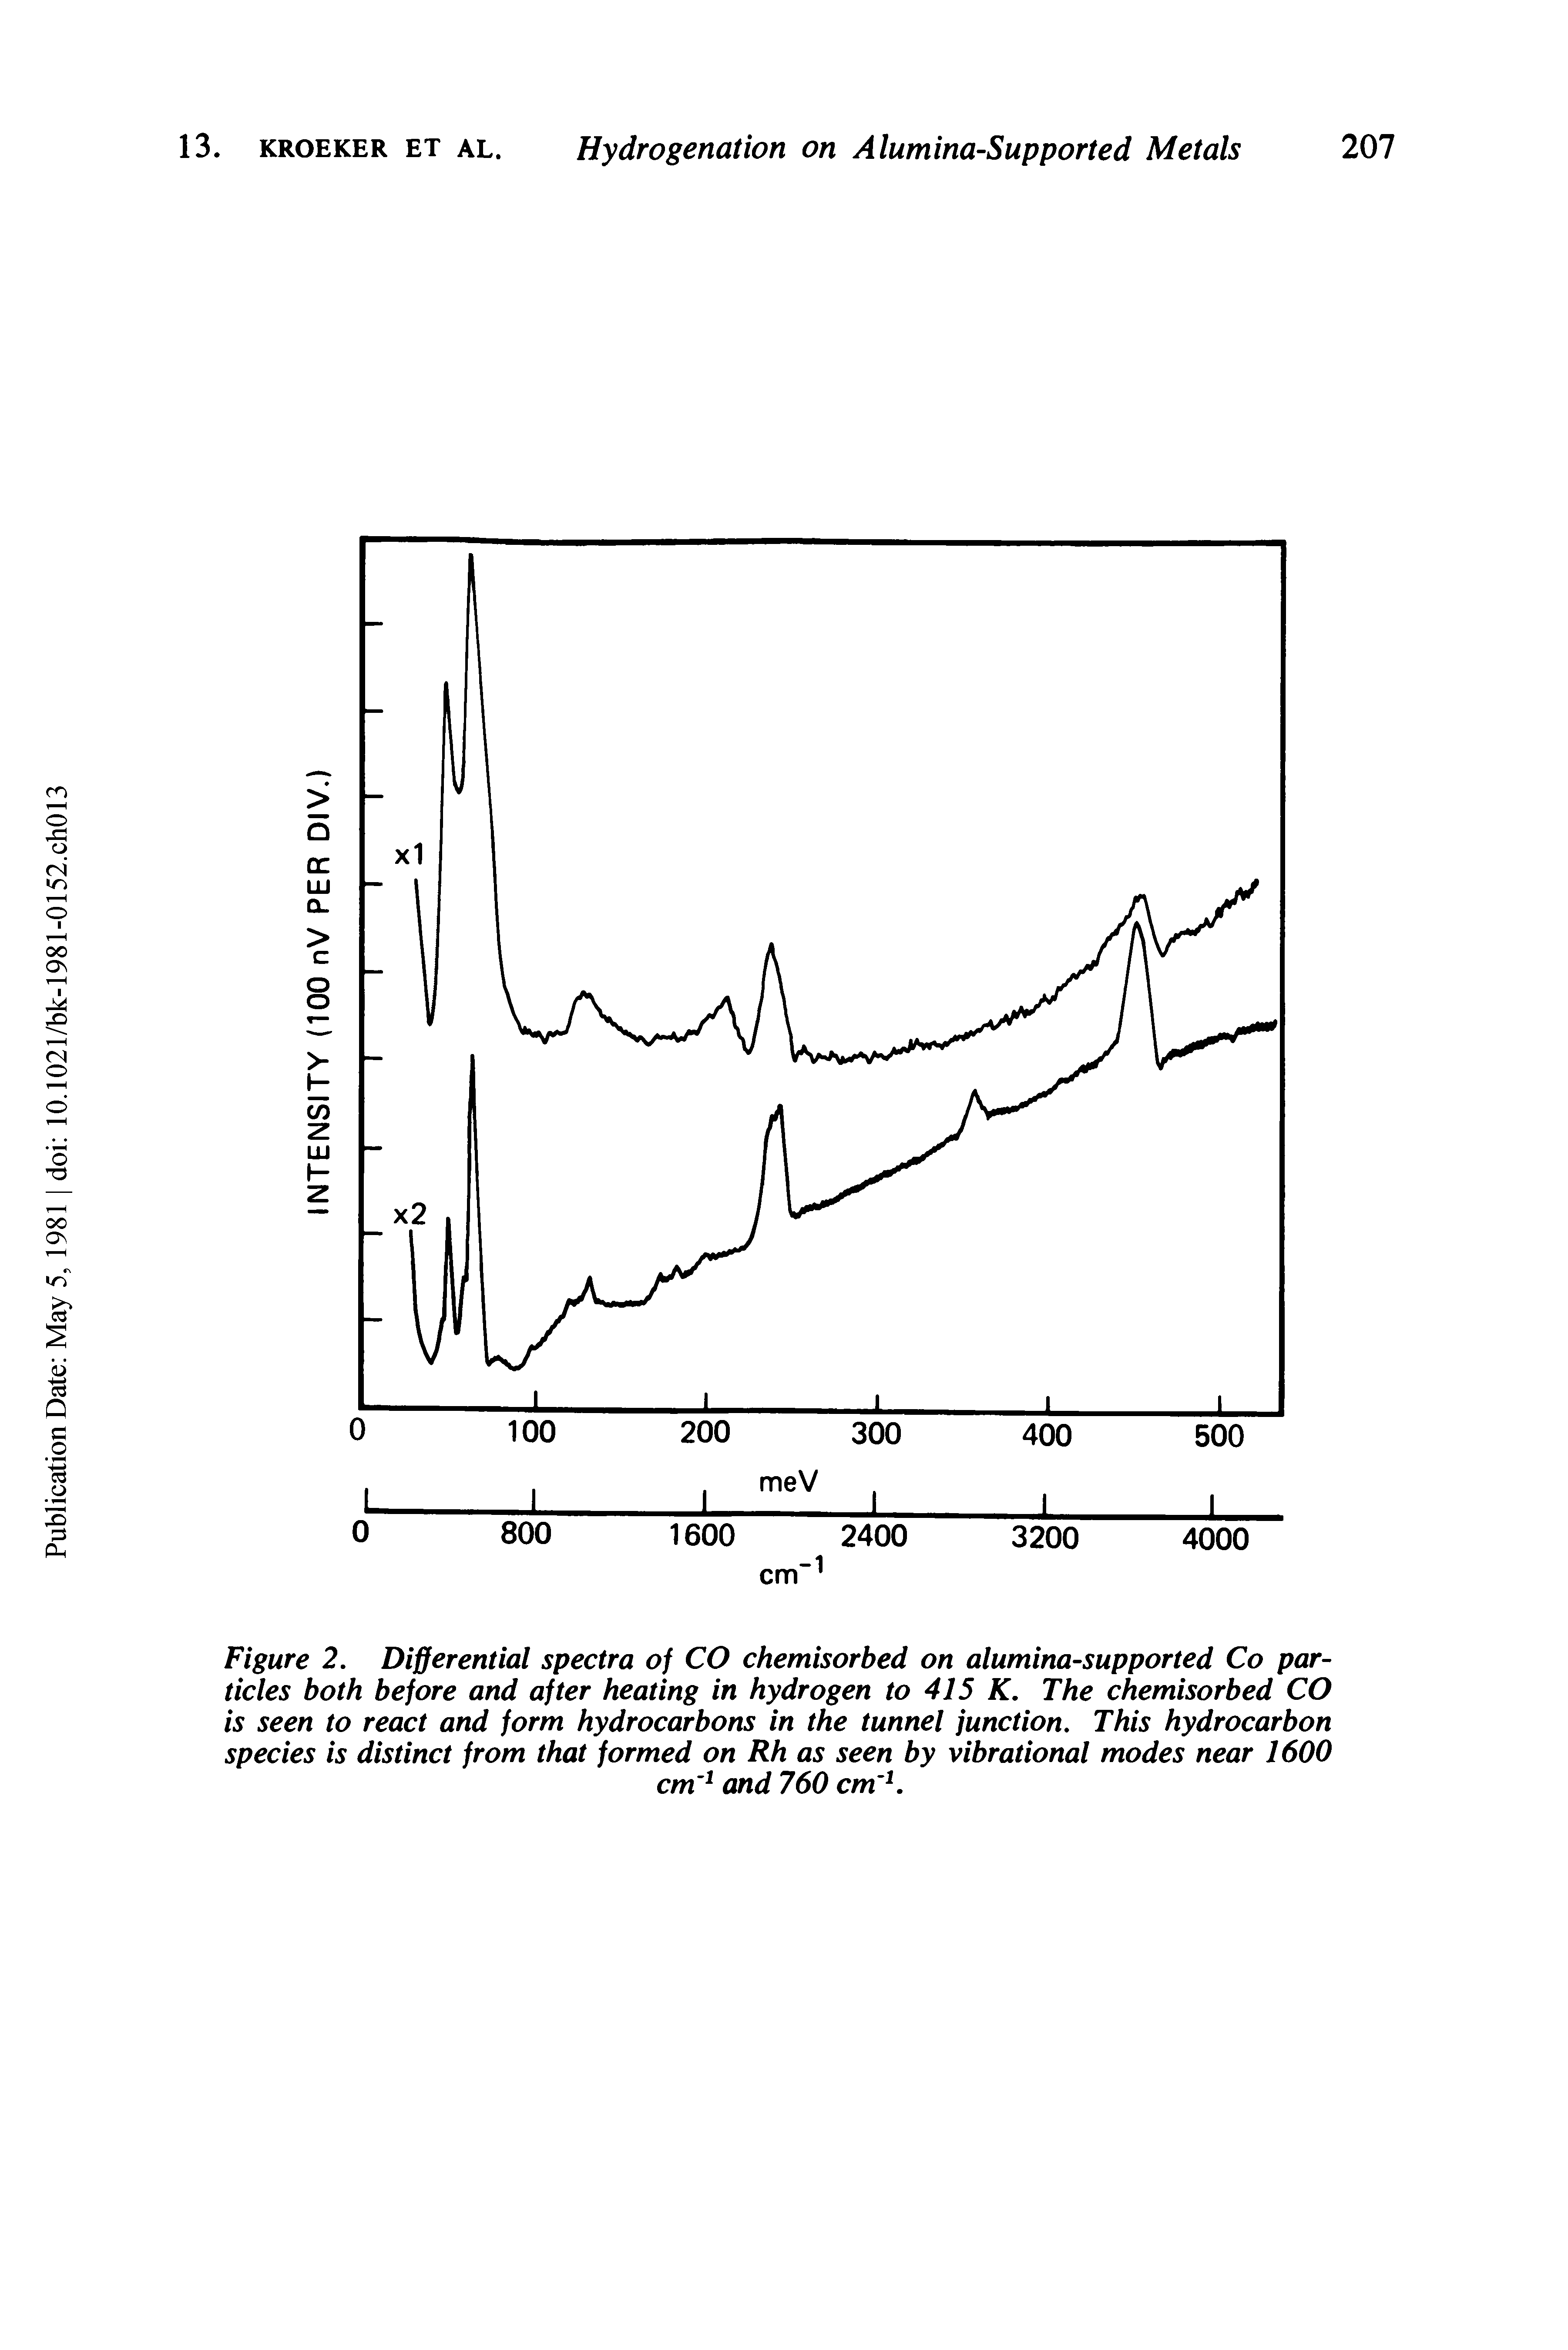 Figure 2. Differential spectra of CO chemisorbed on alumina-supported Co particles both before and after heating in hydrogen to 415 K. The chemisorbed CO is seen to react and form hydrocarbons in the tunnel junction. This hydrocarbon species is distinct from that formed on Rh as seen by vibrational modes near 1600...